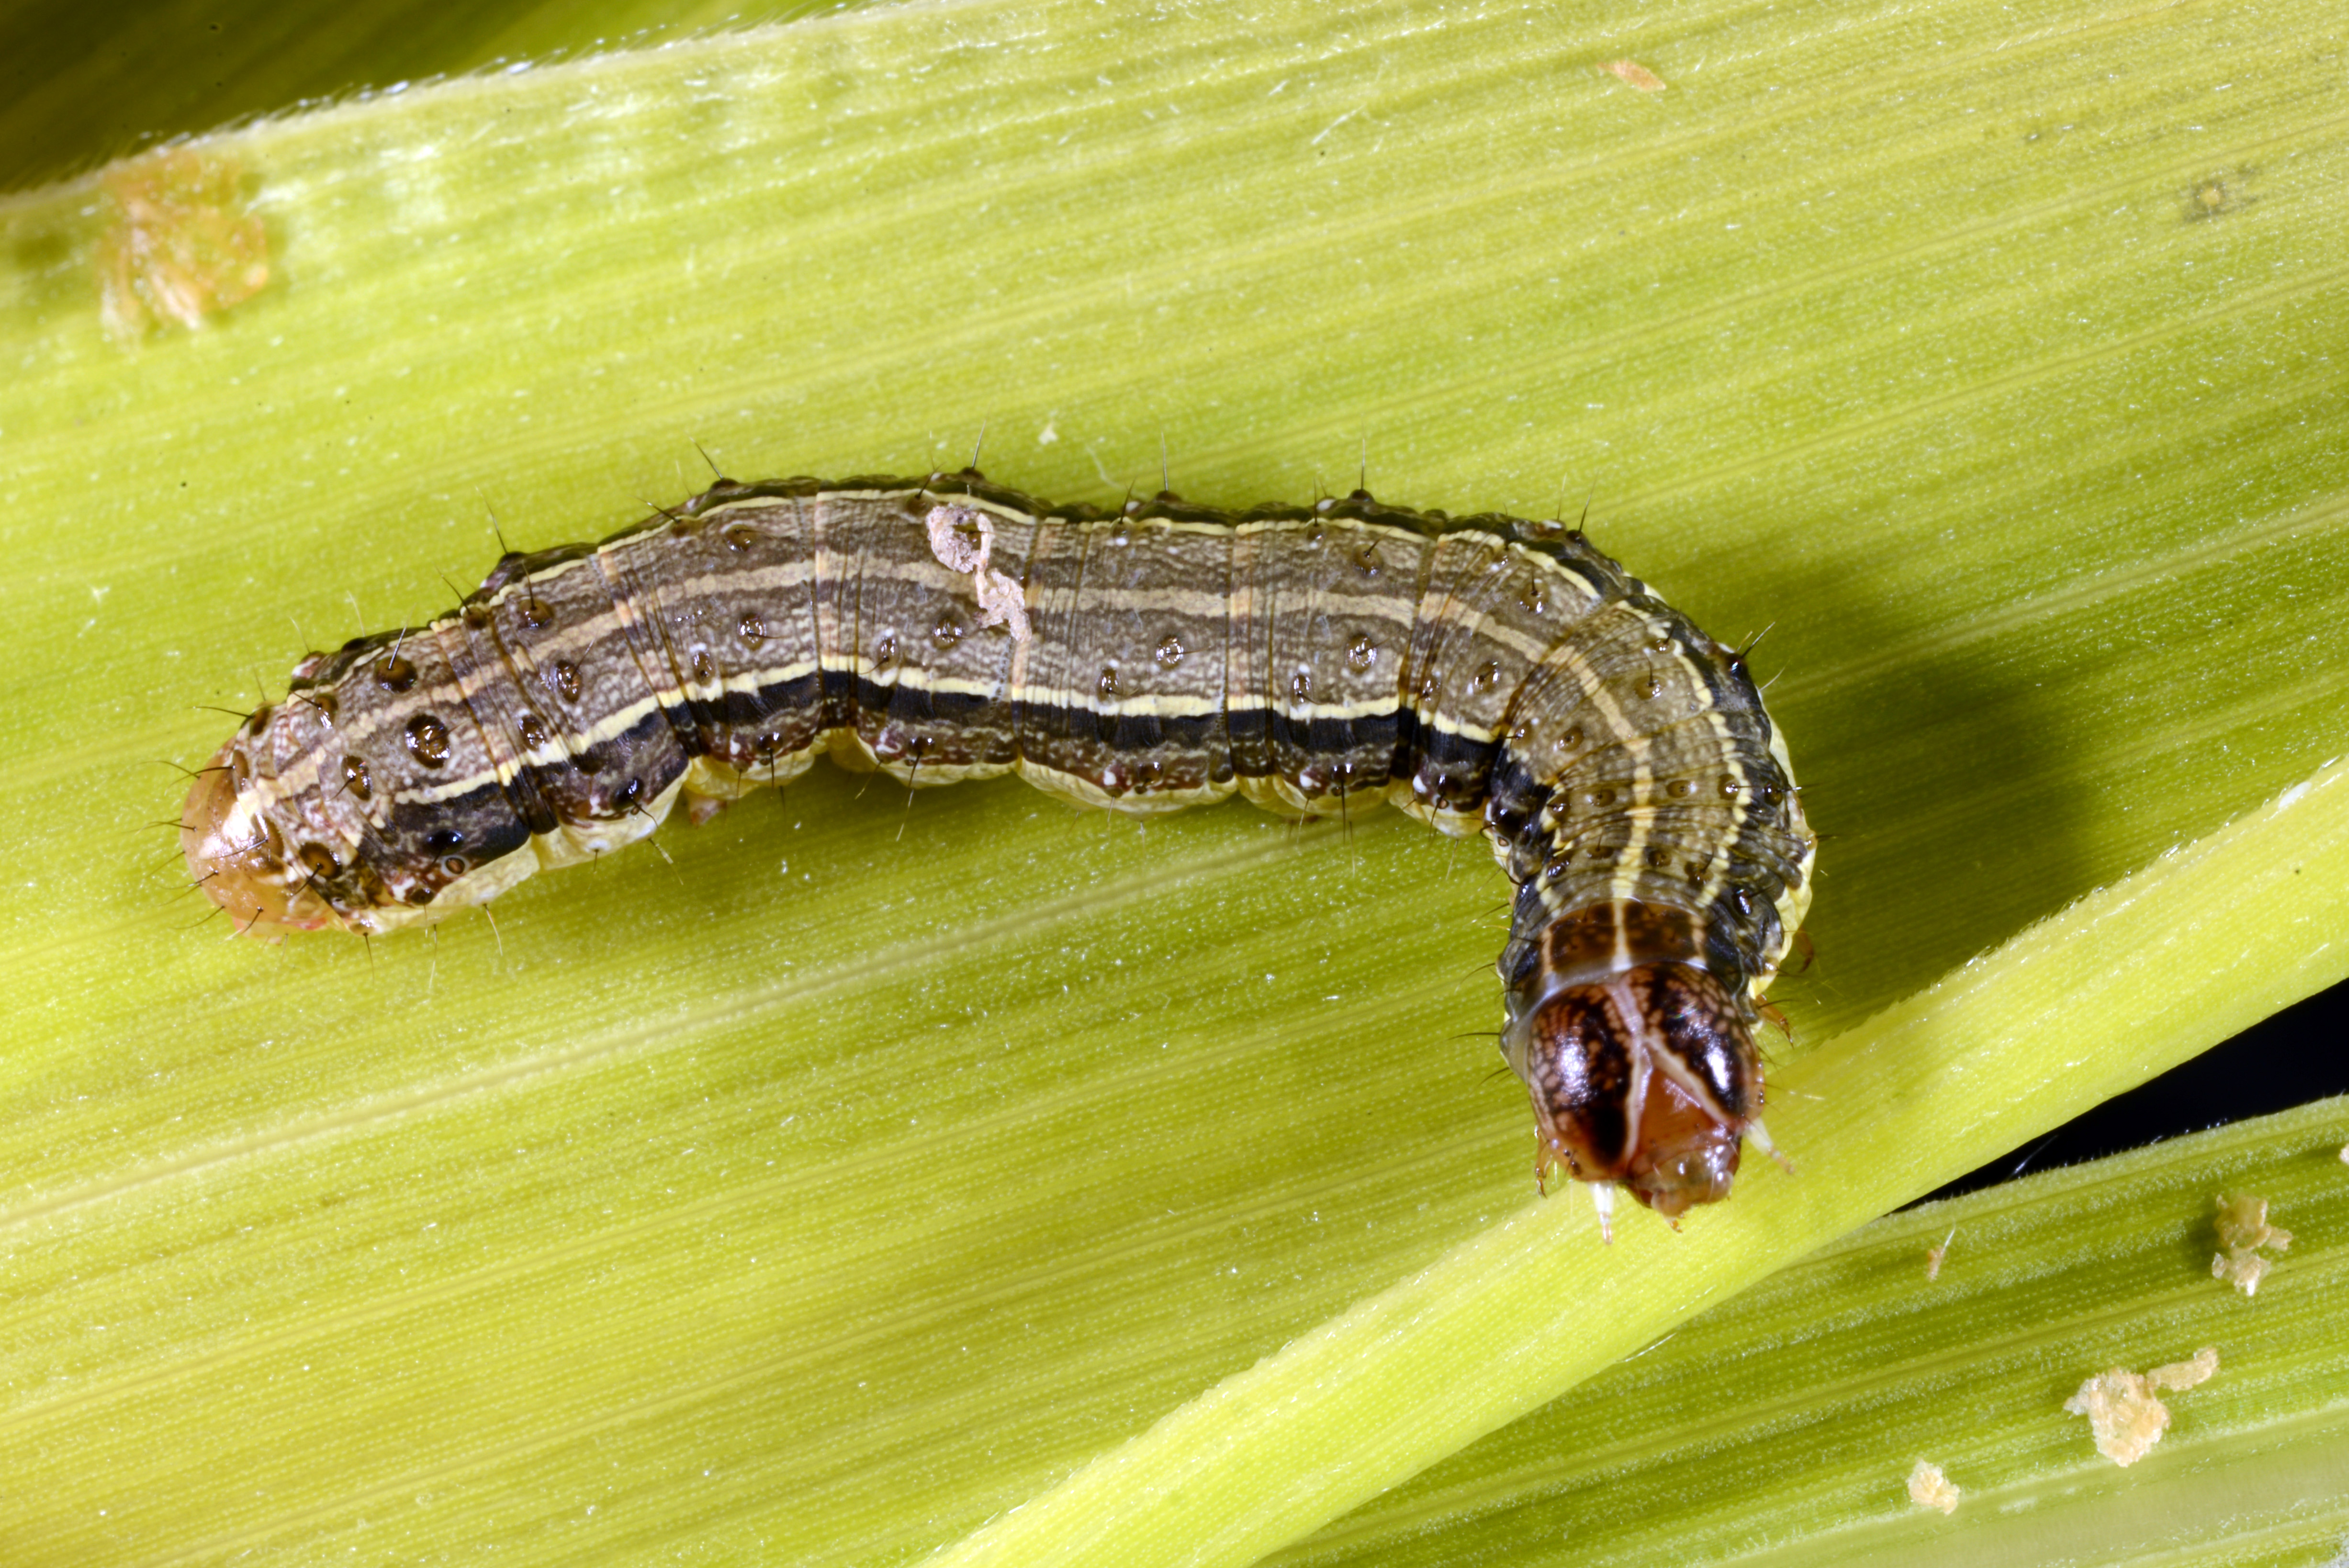 Figure 9. Fall armyworm caterpillar with lengthwise stripes and inverted Y-shape on head. (<em>Photo Credit: J. Obermeyer</em>).